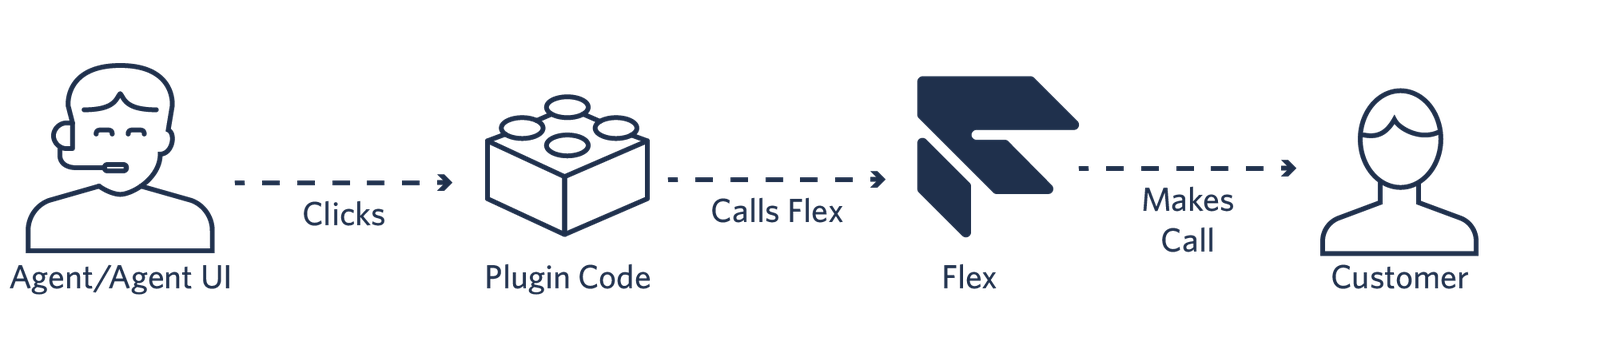 A flow diagram showing how an agent clicks a number to invoke a Flex action and make an outbound call.